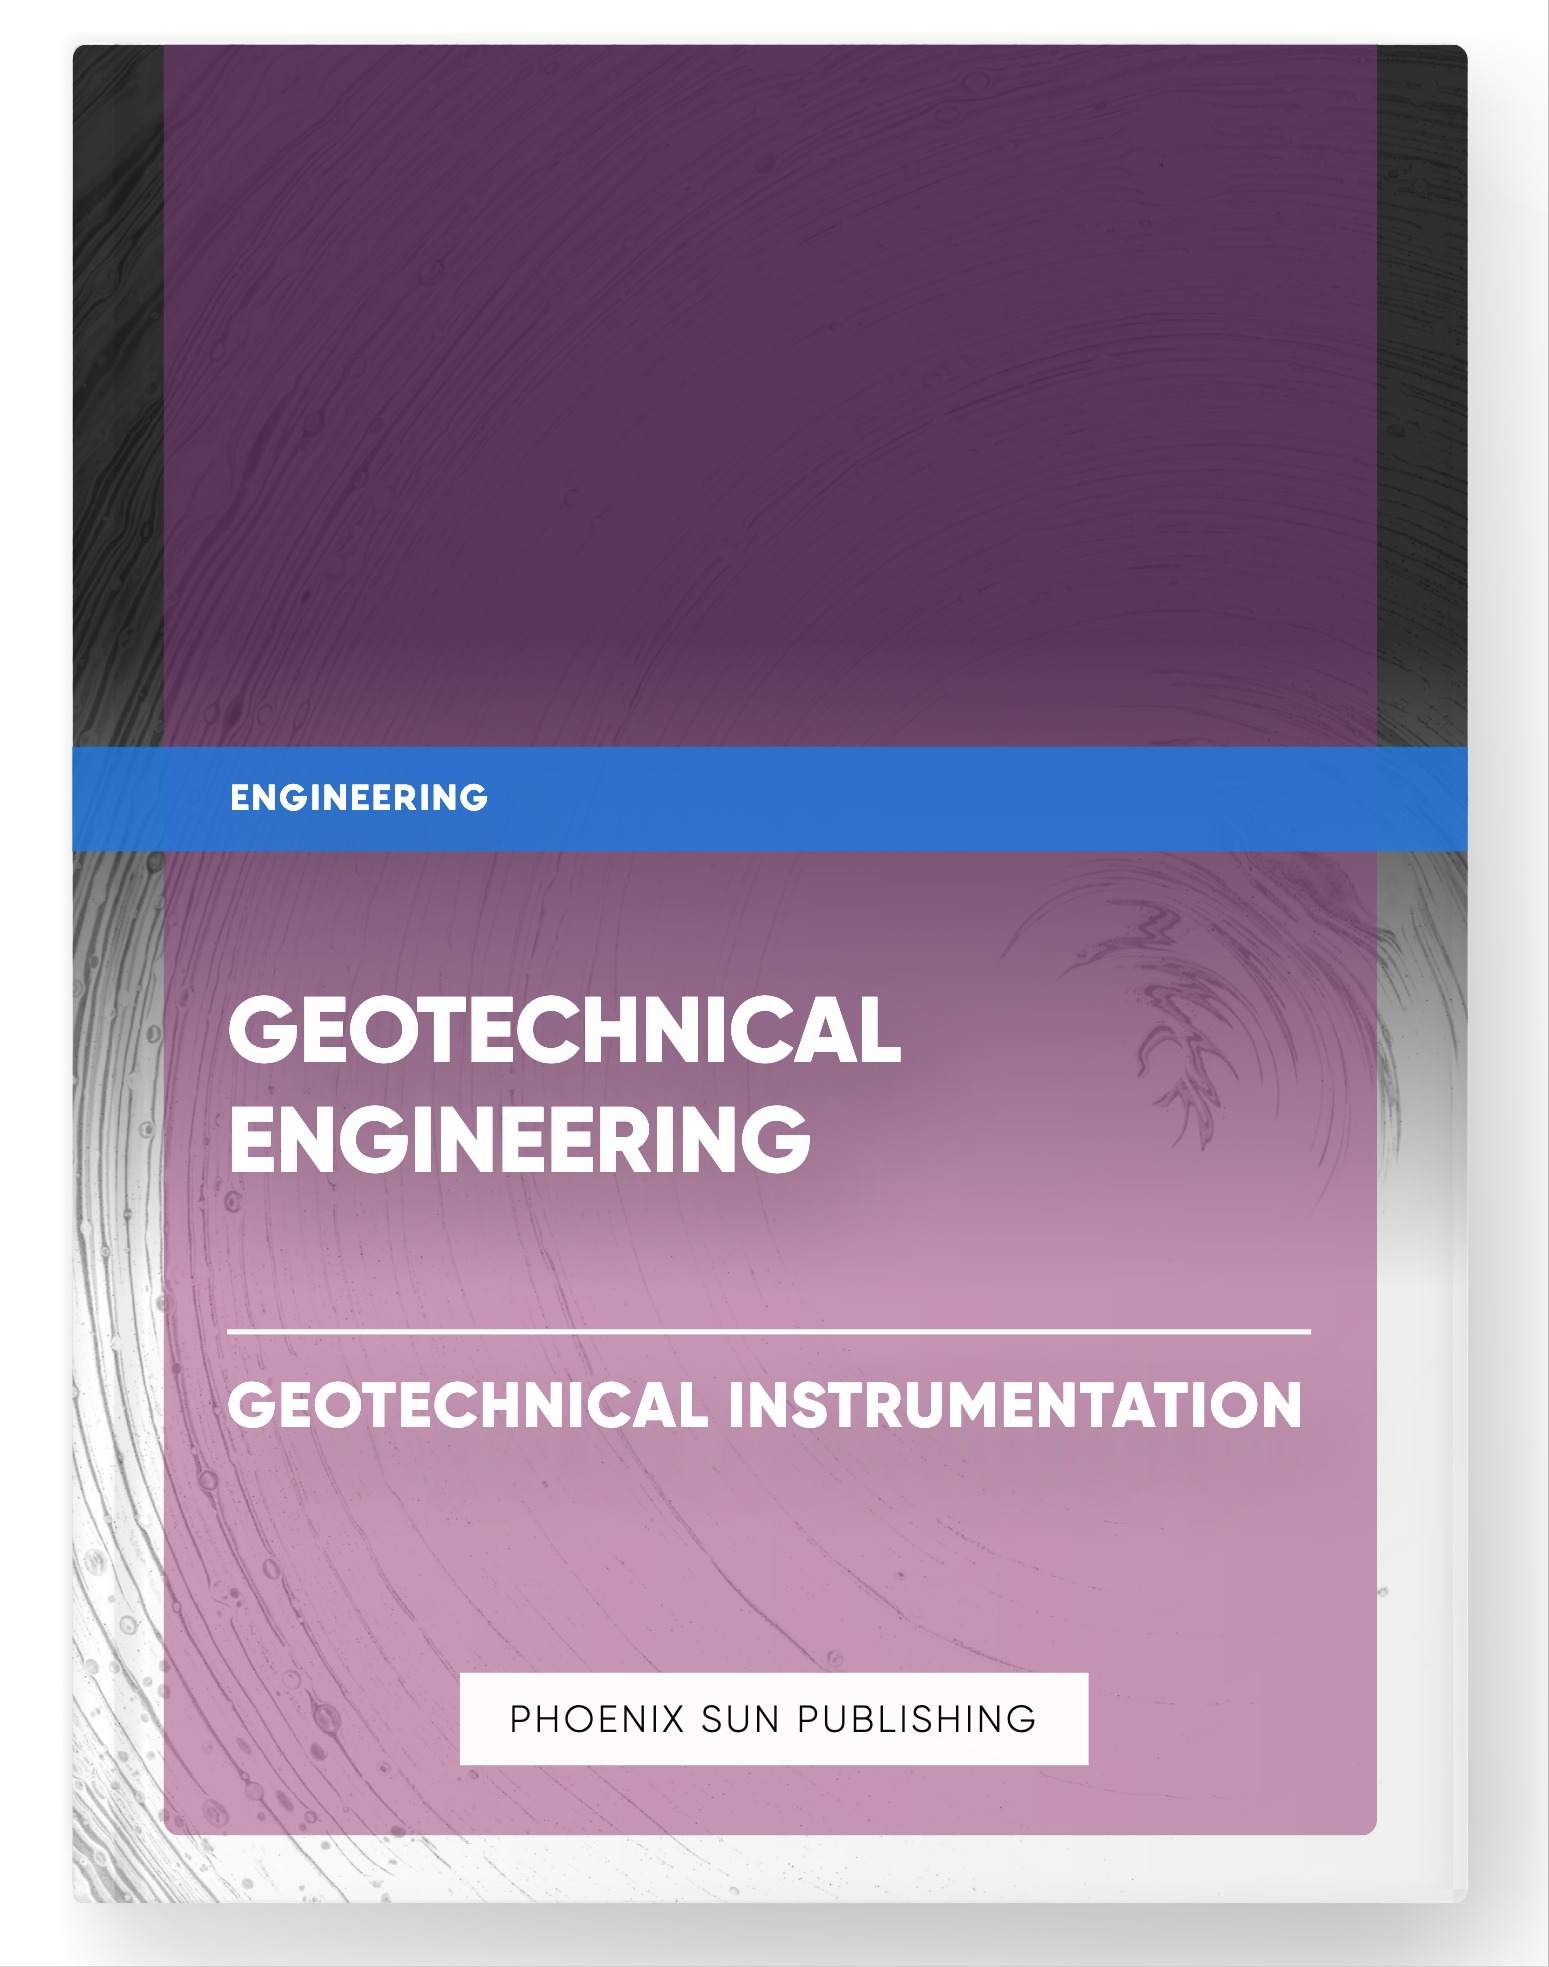 Geotechnical Engineering – Geotechnical Instrumentation